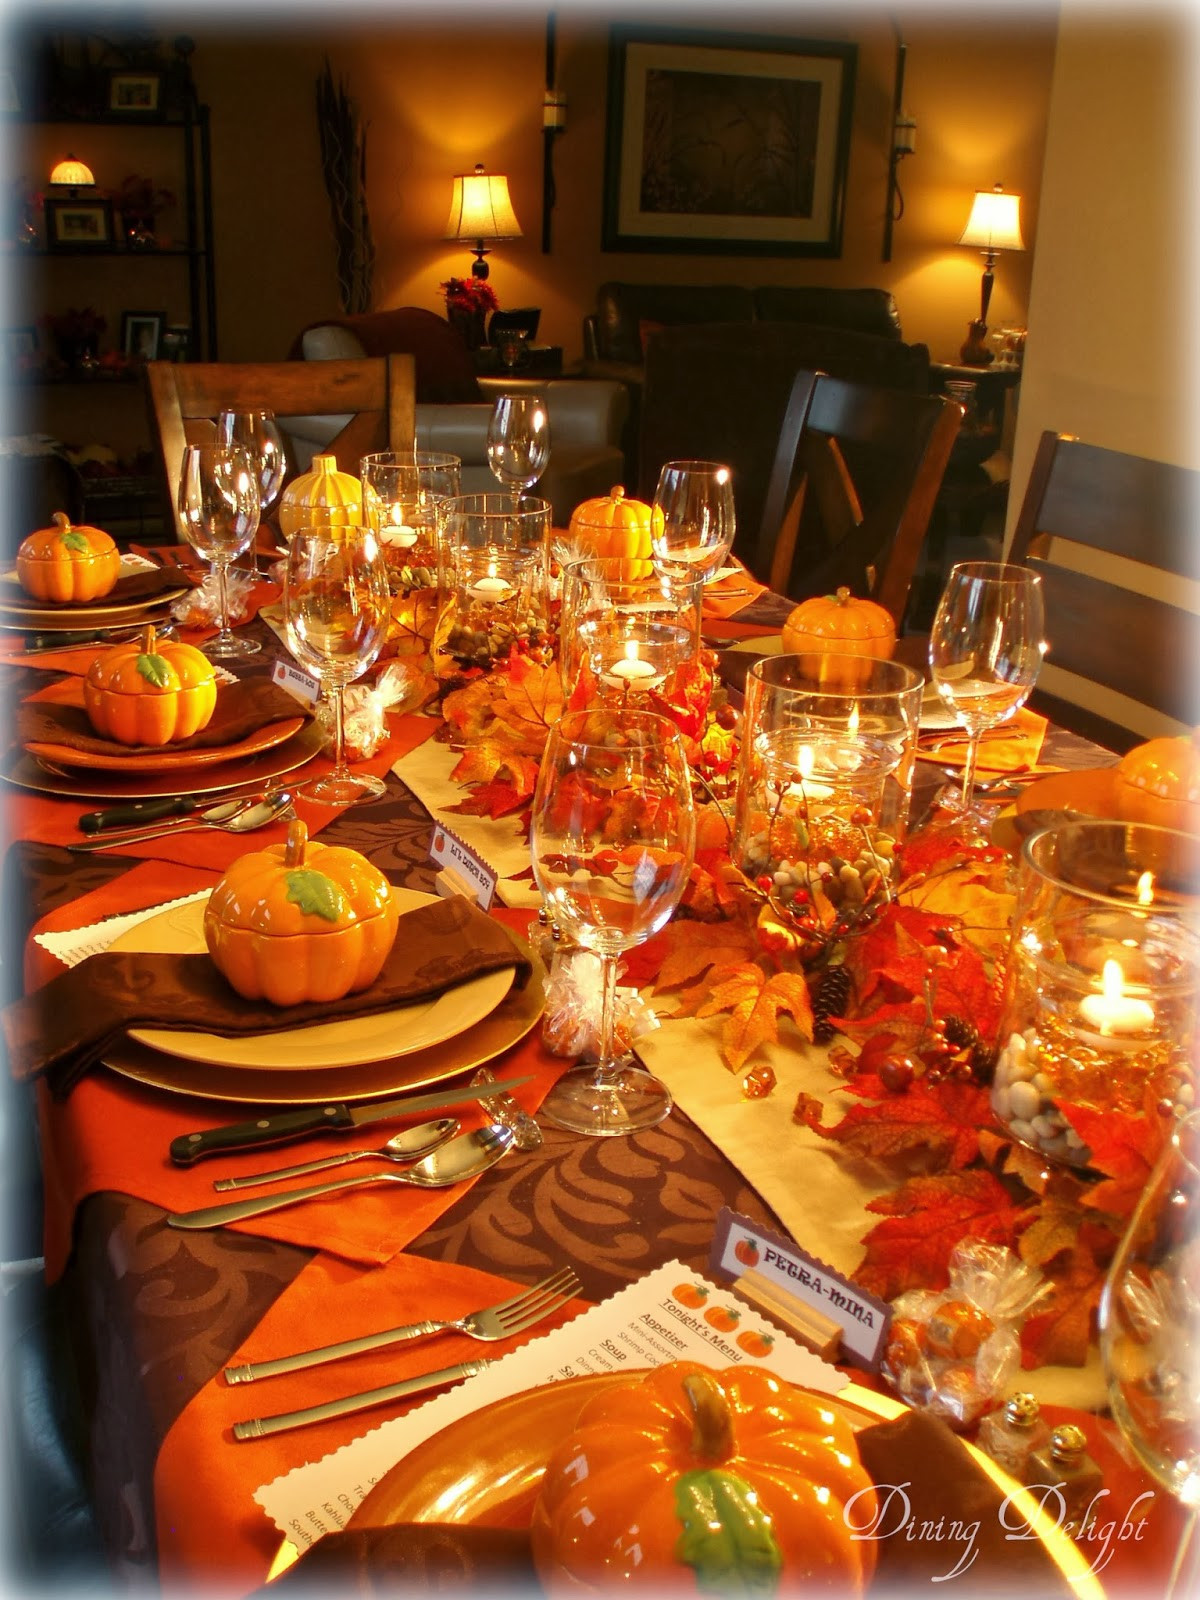 Centerpiece Ideas For Dinner Party
 Dining Delight Fall Dinner Party for Ten